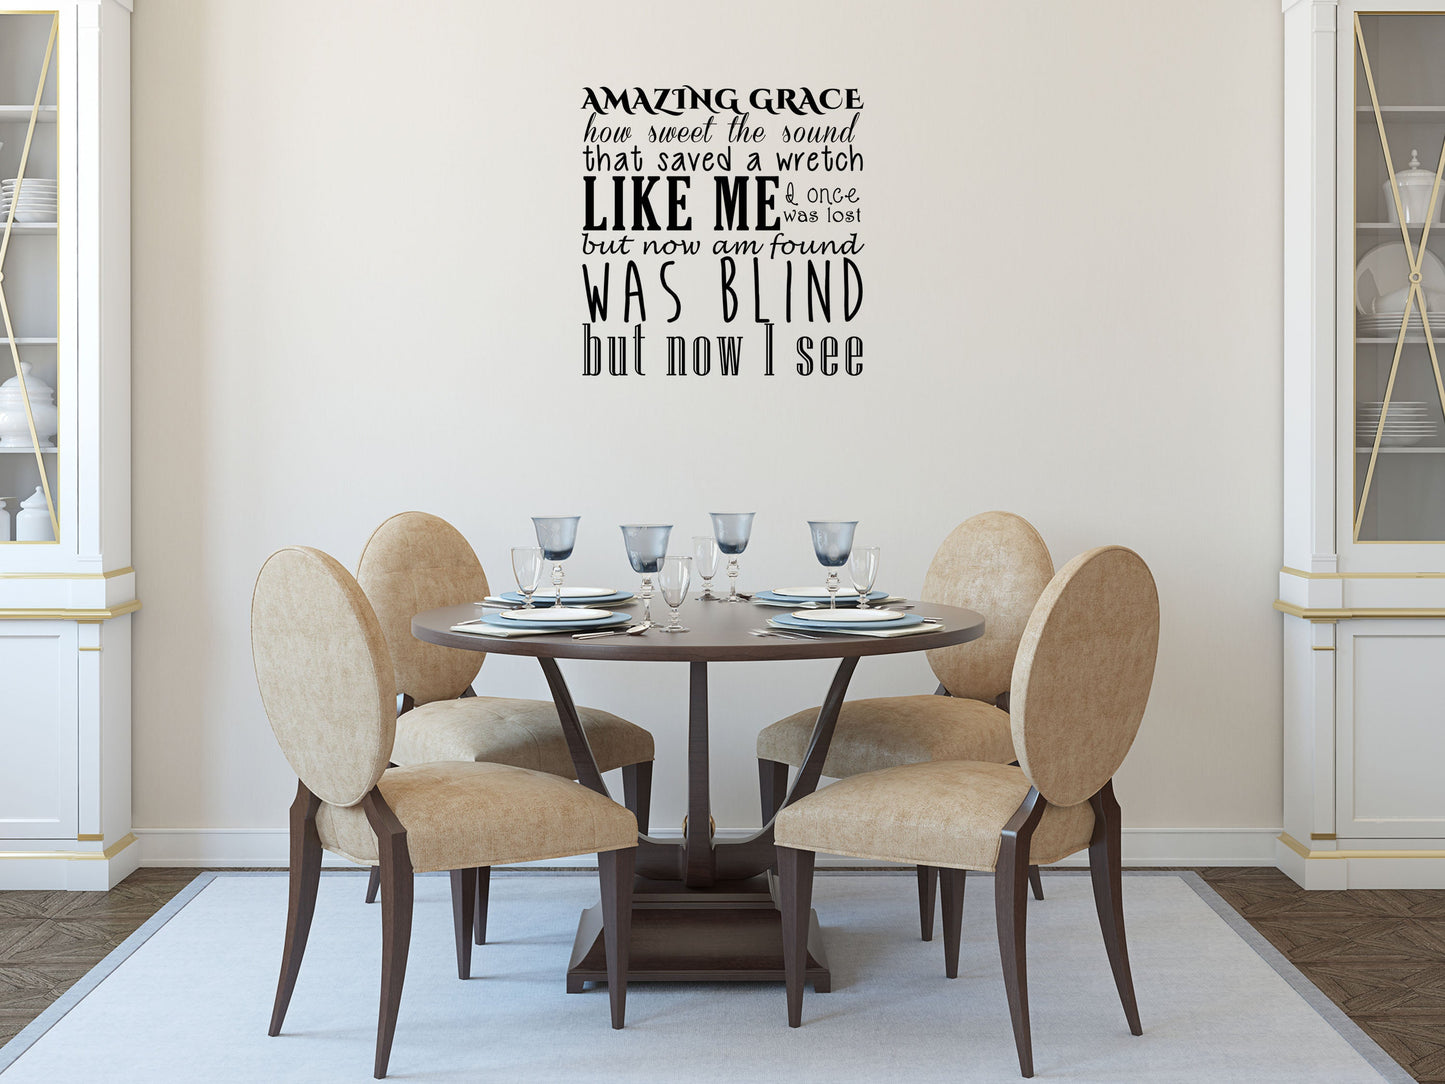 Amazing Grace Inspirational Wall - Hymn Wall Decal - Christian Decor Vinyl Wall Decal Title Done 